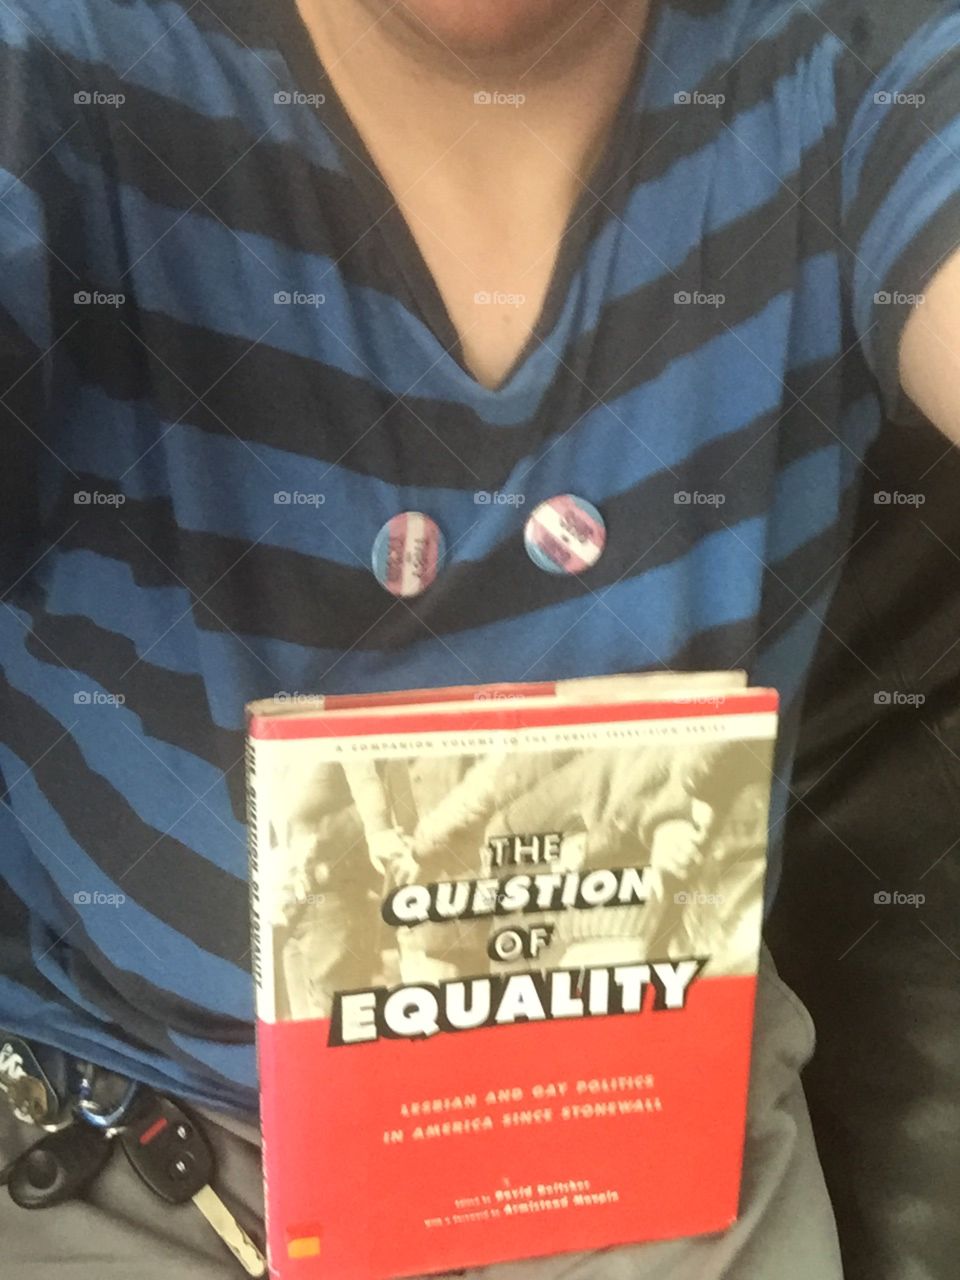 It’s a photo of a they/them and she/her pronoun buttons, plus the cover of the book “the question of equality: lesbian and gay politics...” re the stonewall riots 1960’s origins of modern pride weeks across the modern world in the 20th century etc 